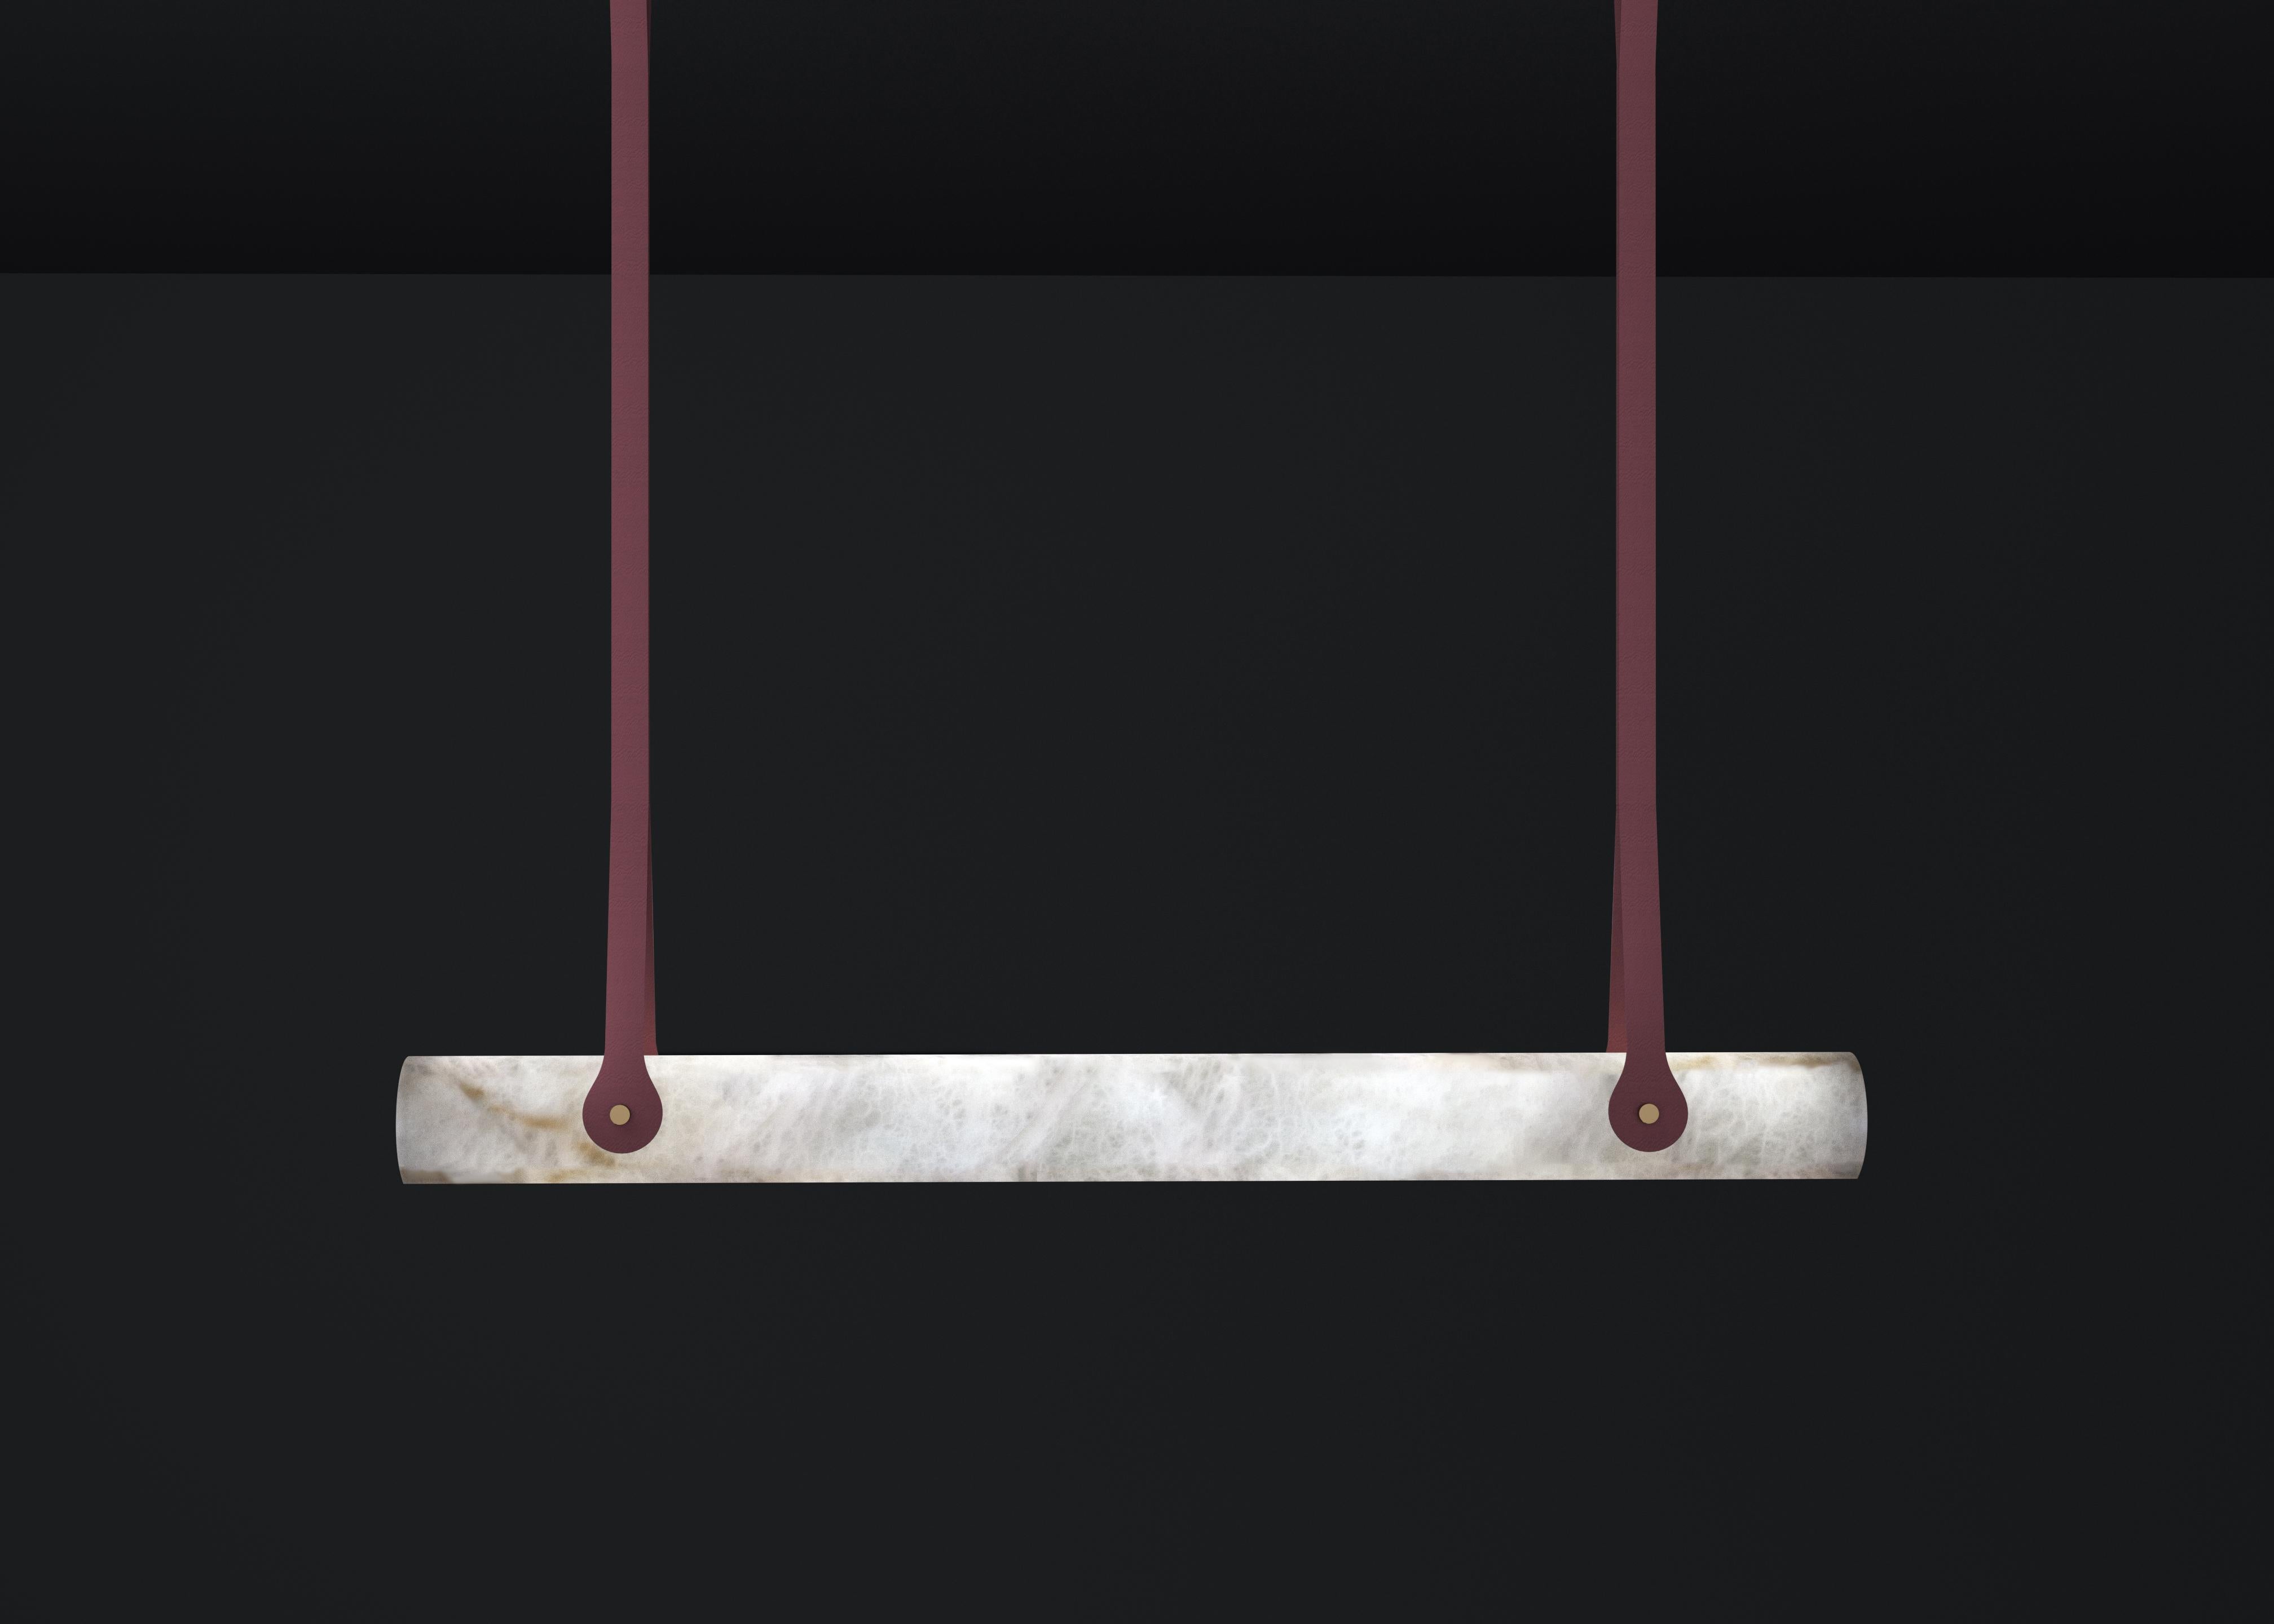 Zeus Pomegranate Red Leather Pendant Lamp by Alabastro Italiano
Dimensions: D 11 x W 120 x H 100 cm.
Materials: White alabaster and leather.

Available in different finishes: Black leather, Brown Earth leather, Brown Sahara leather and Pomegranate